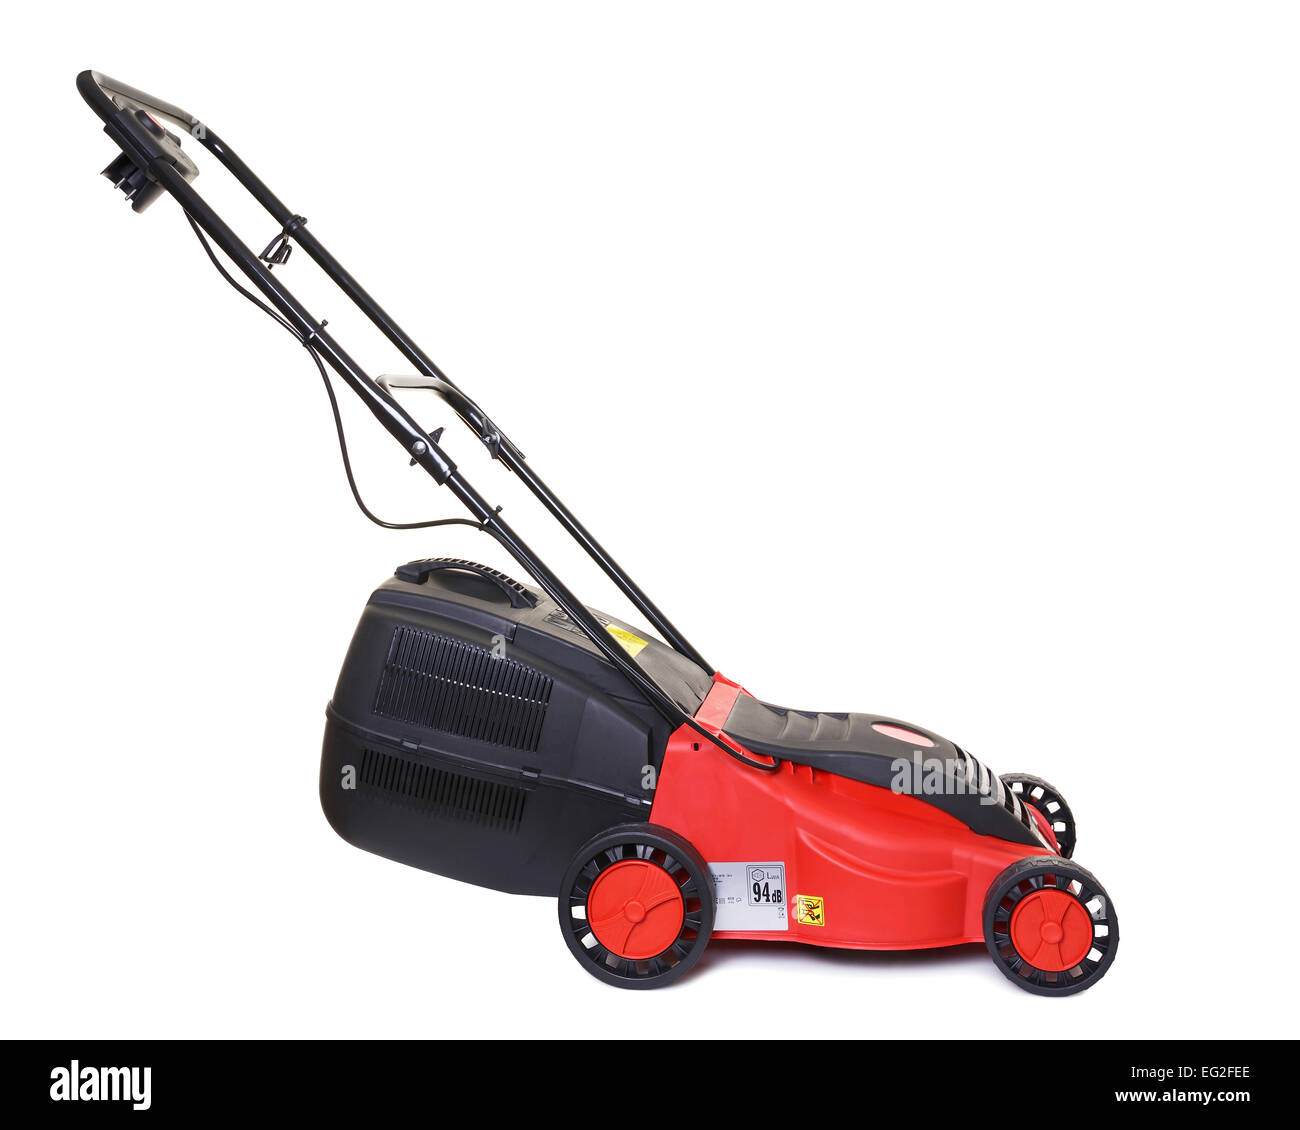 Lawn Mower, Cut Out. Stock Photo